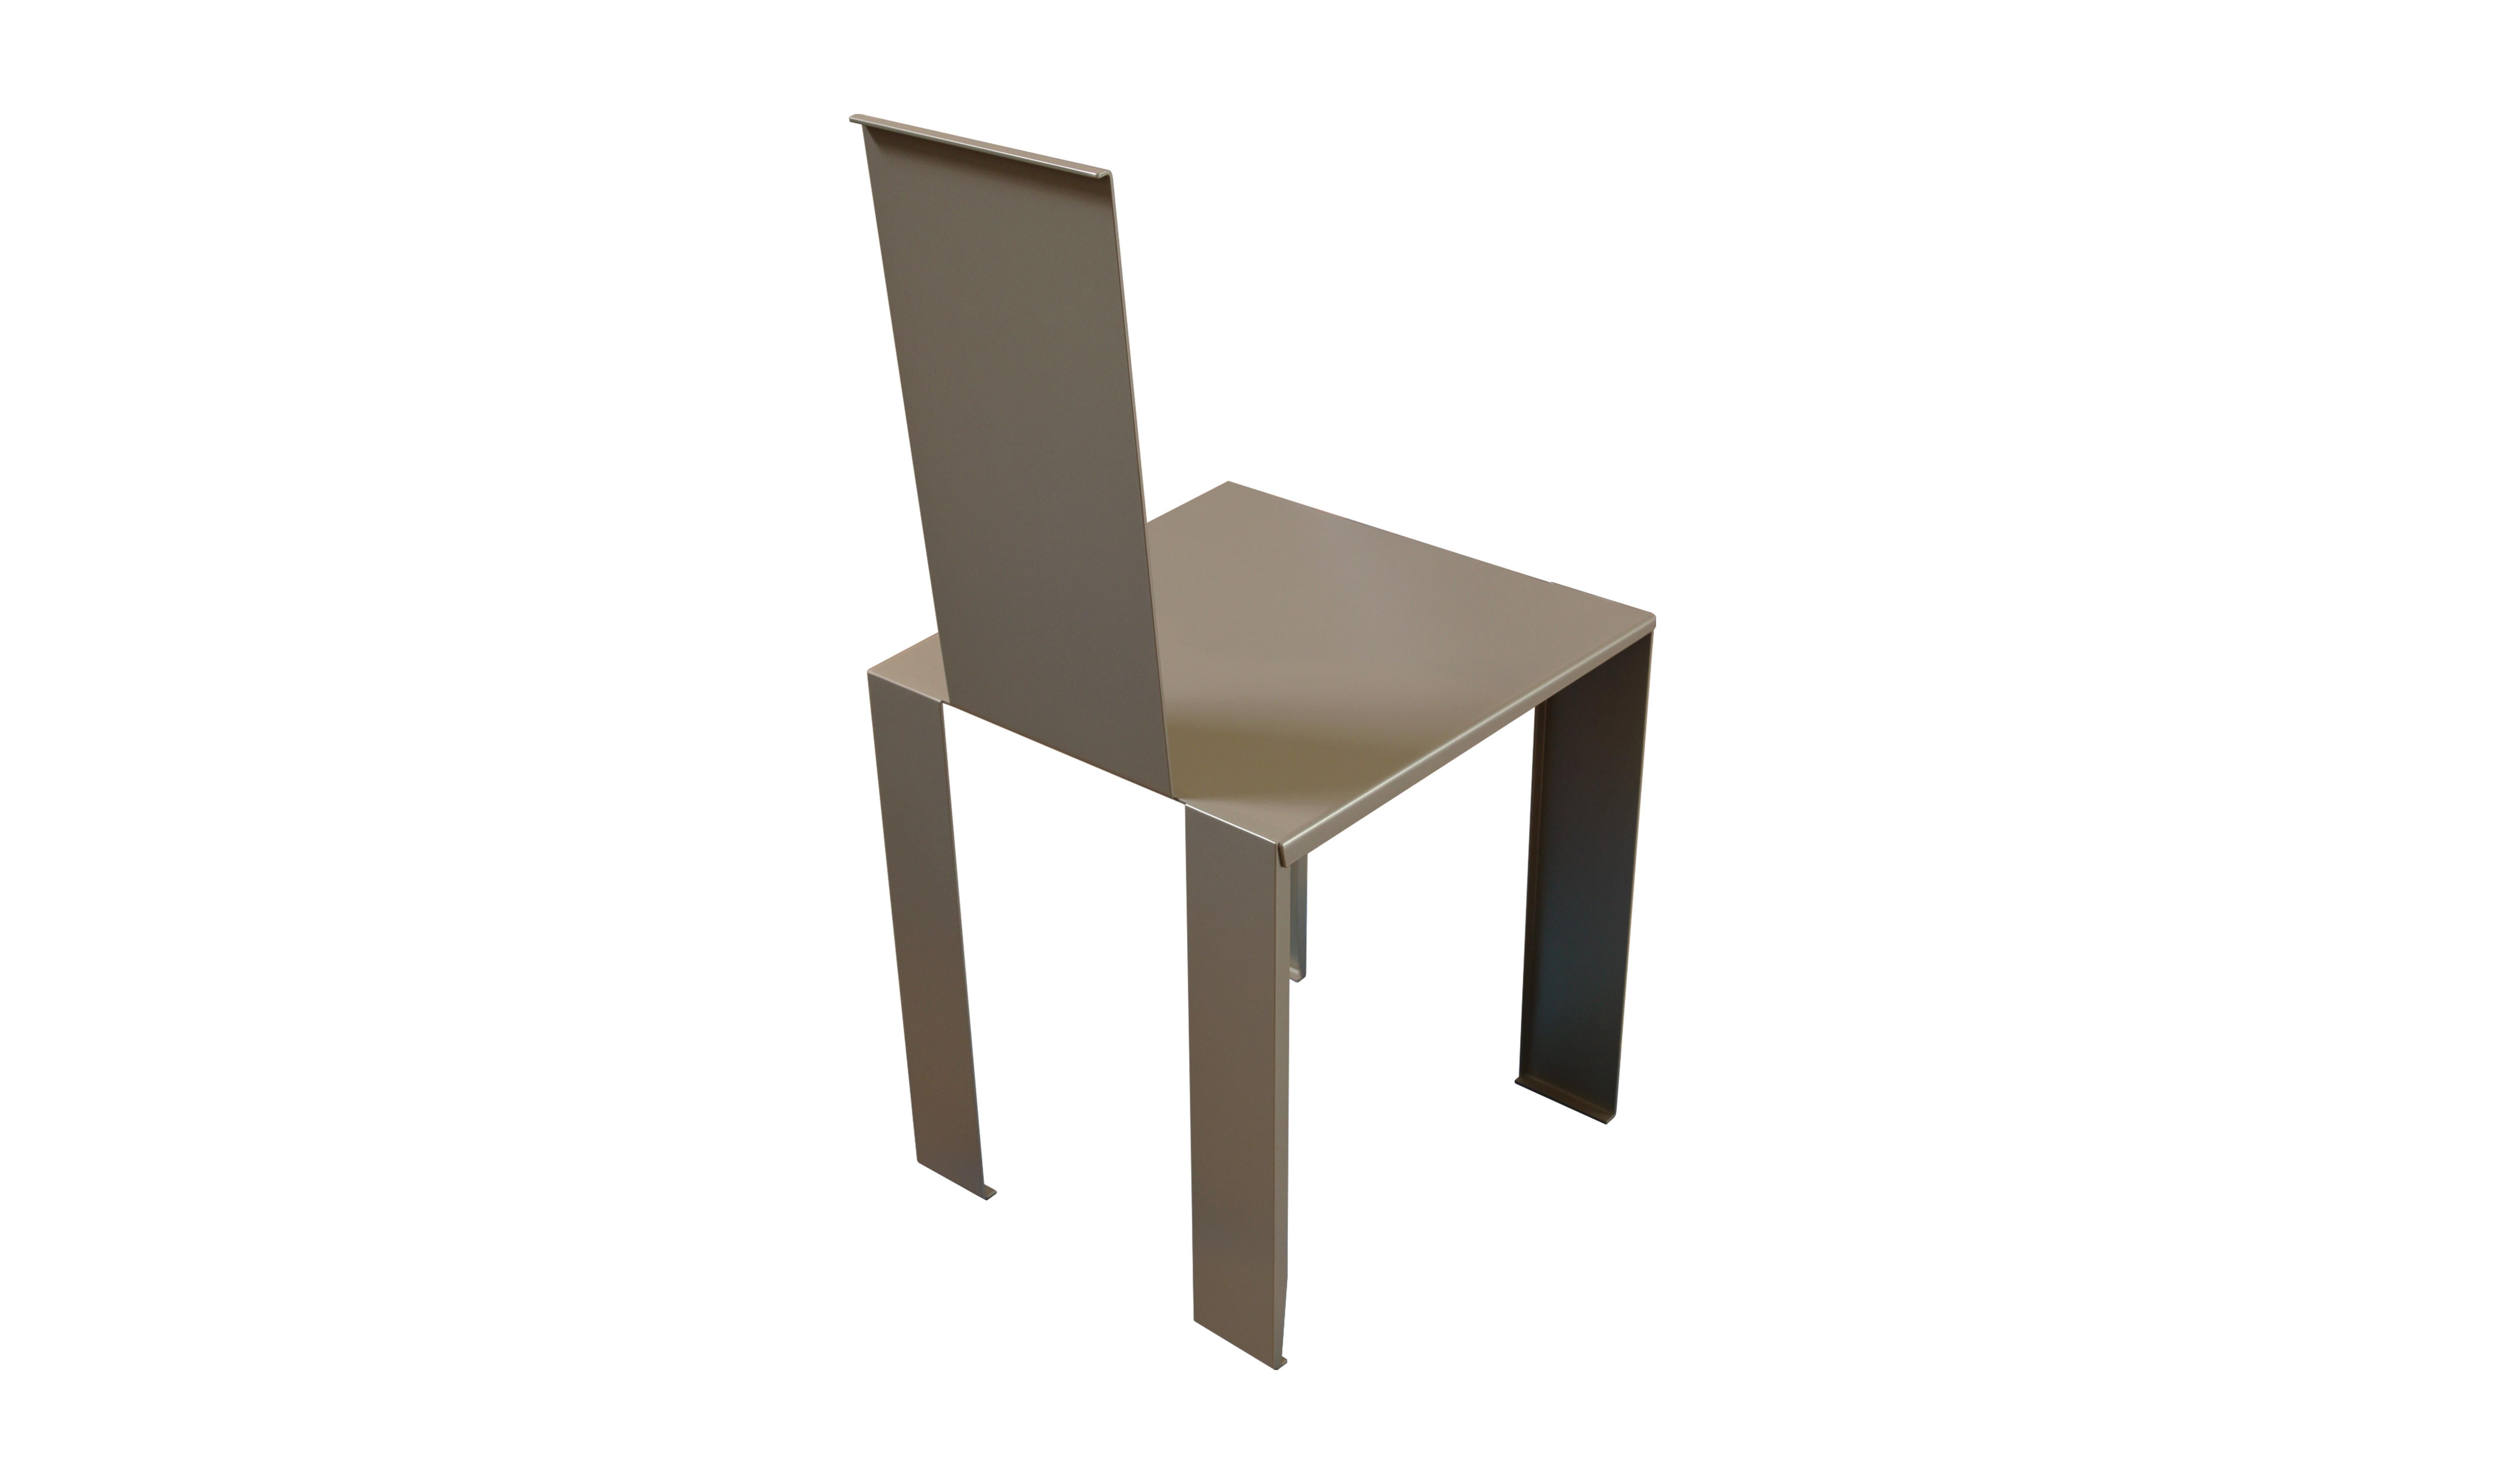 Powder-Coated Italian Contemporary Chair Made from Folded Steel Sheet, 